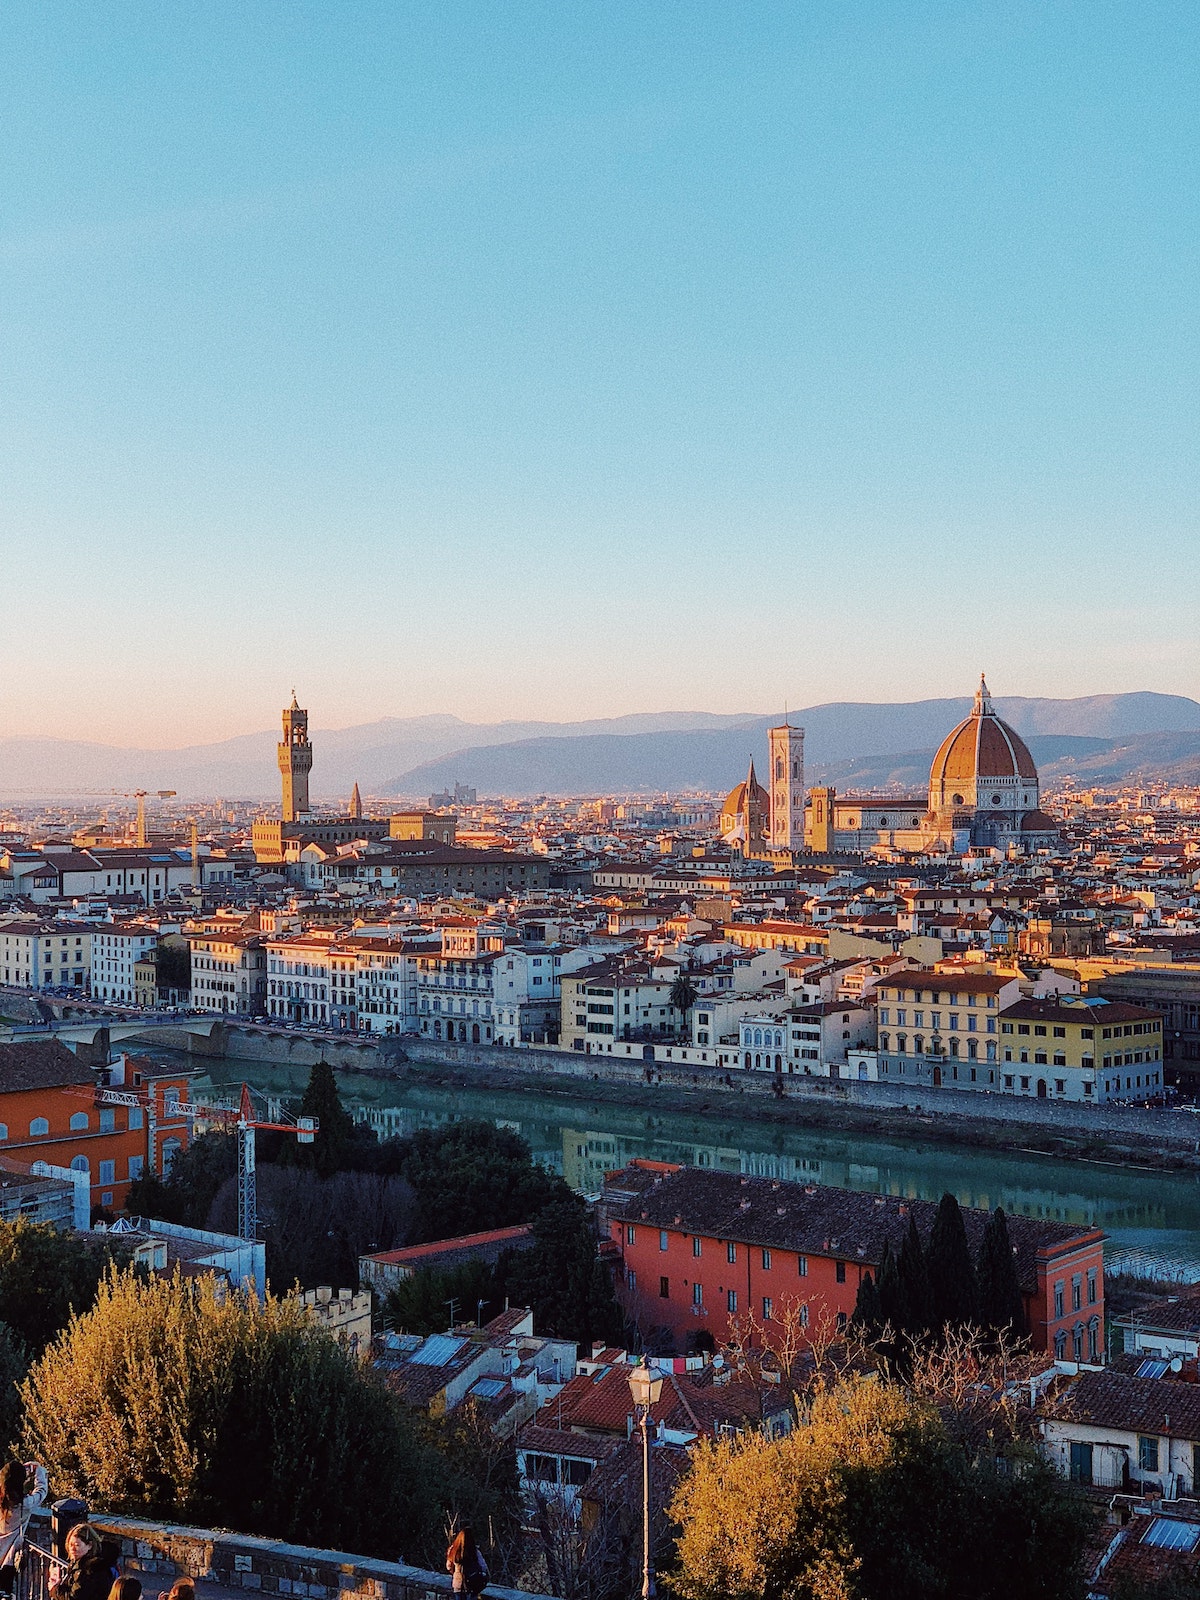 View over the city of Florence, Italy at sunset